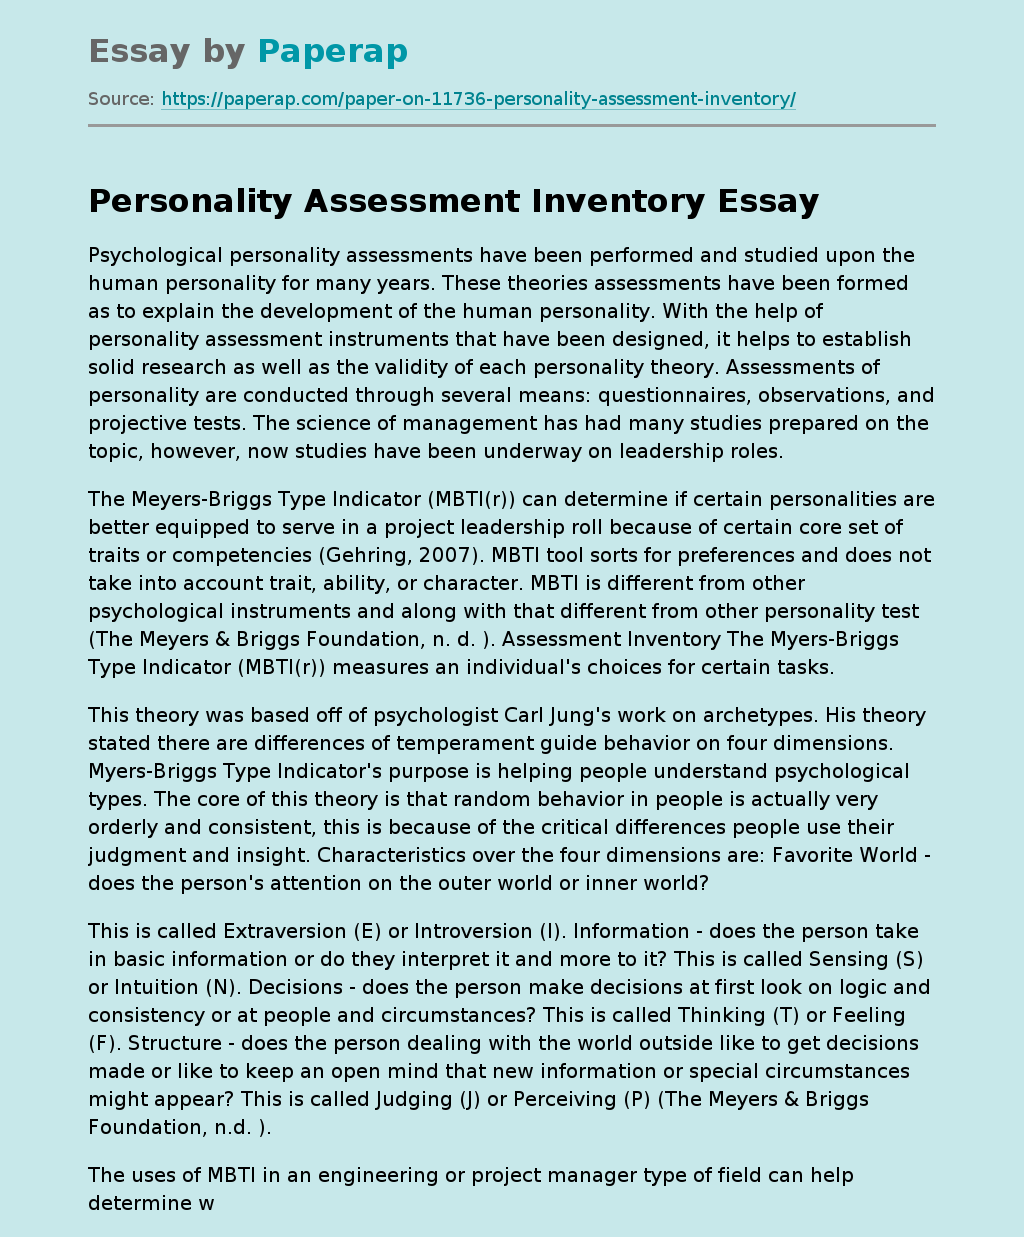 Personality Assessment Inventory